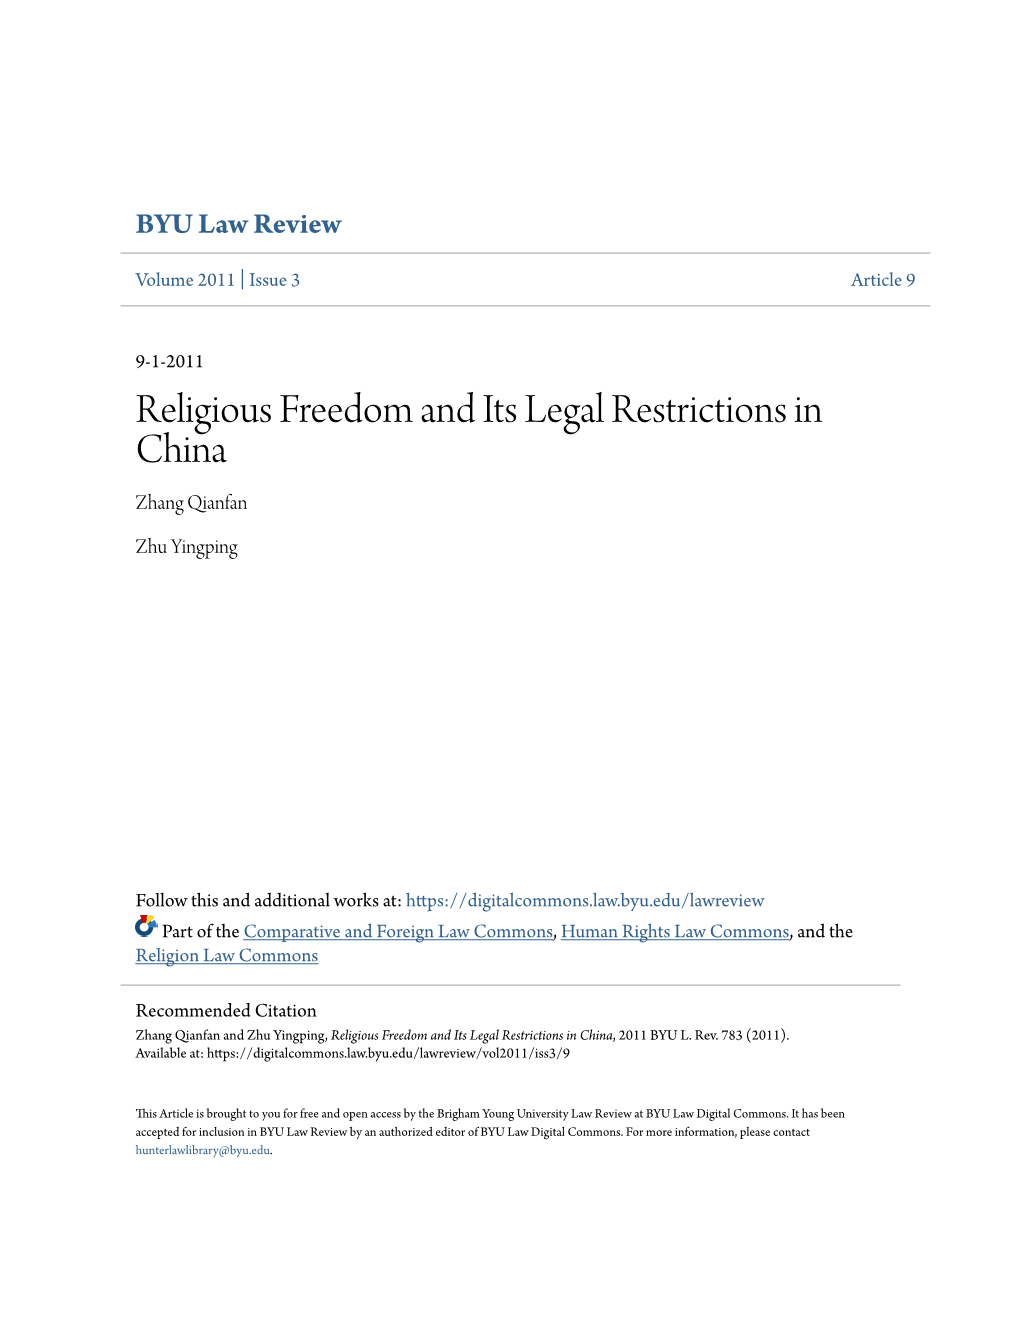 Religious Freedom and Its Legal Restrictions in China Zhang Qianfan